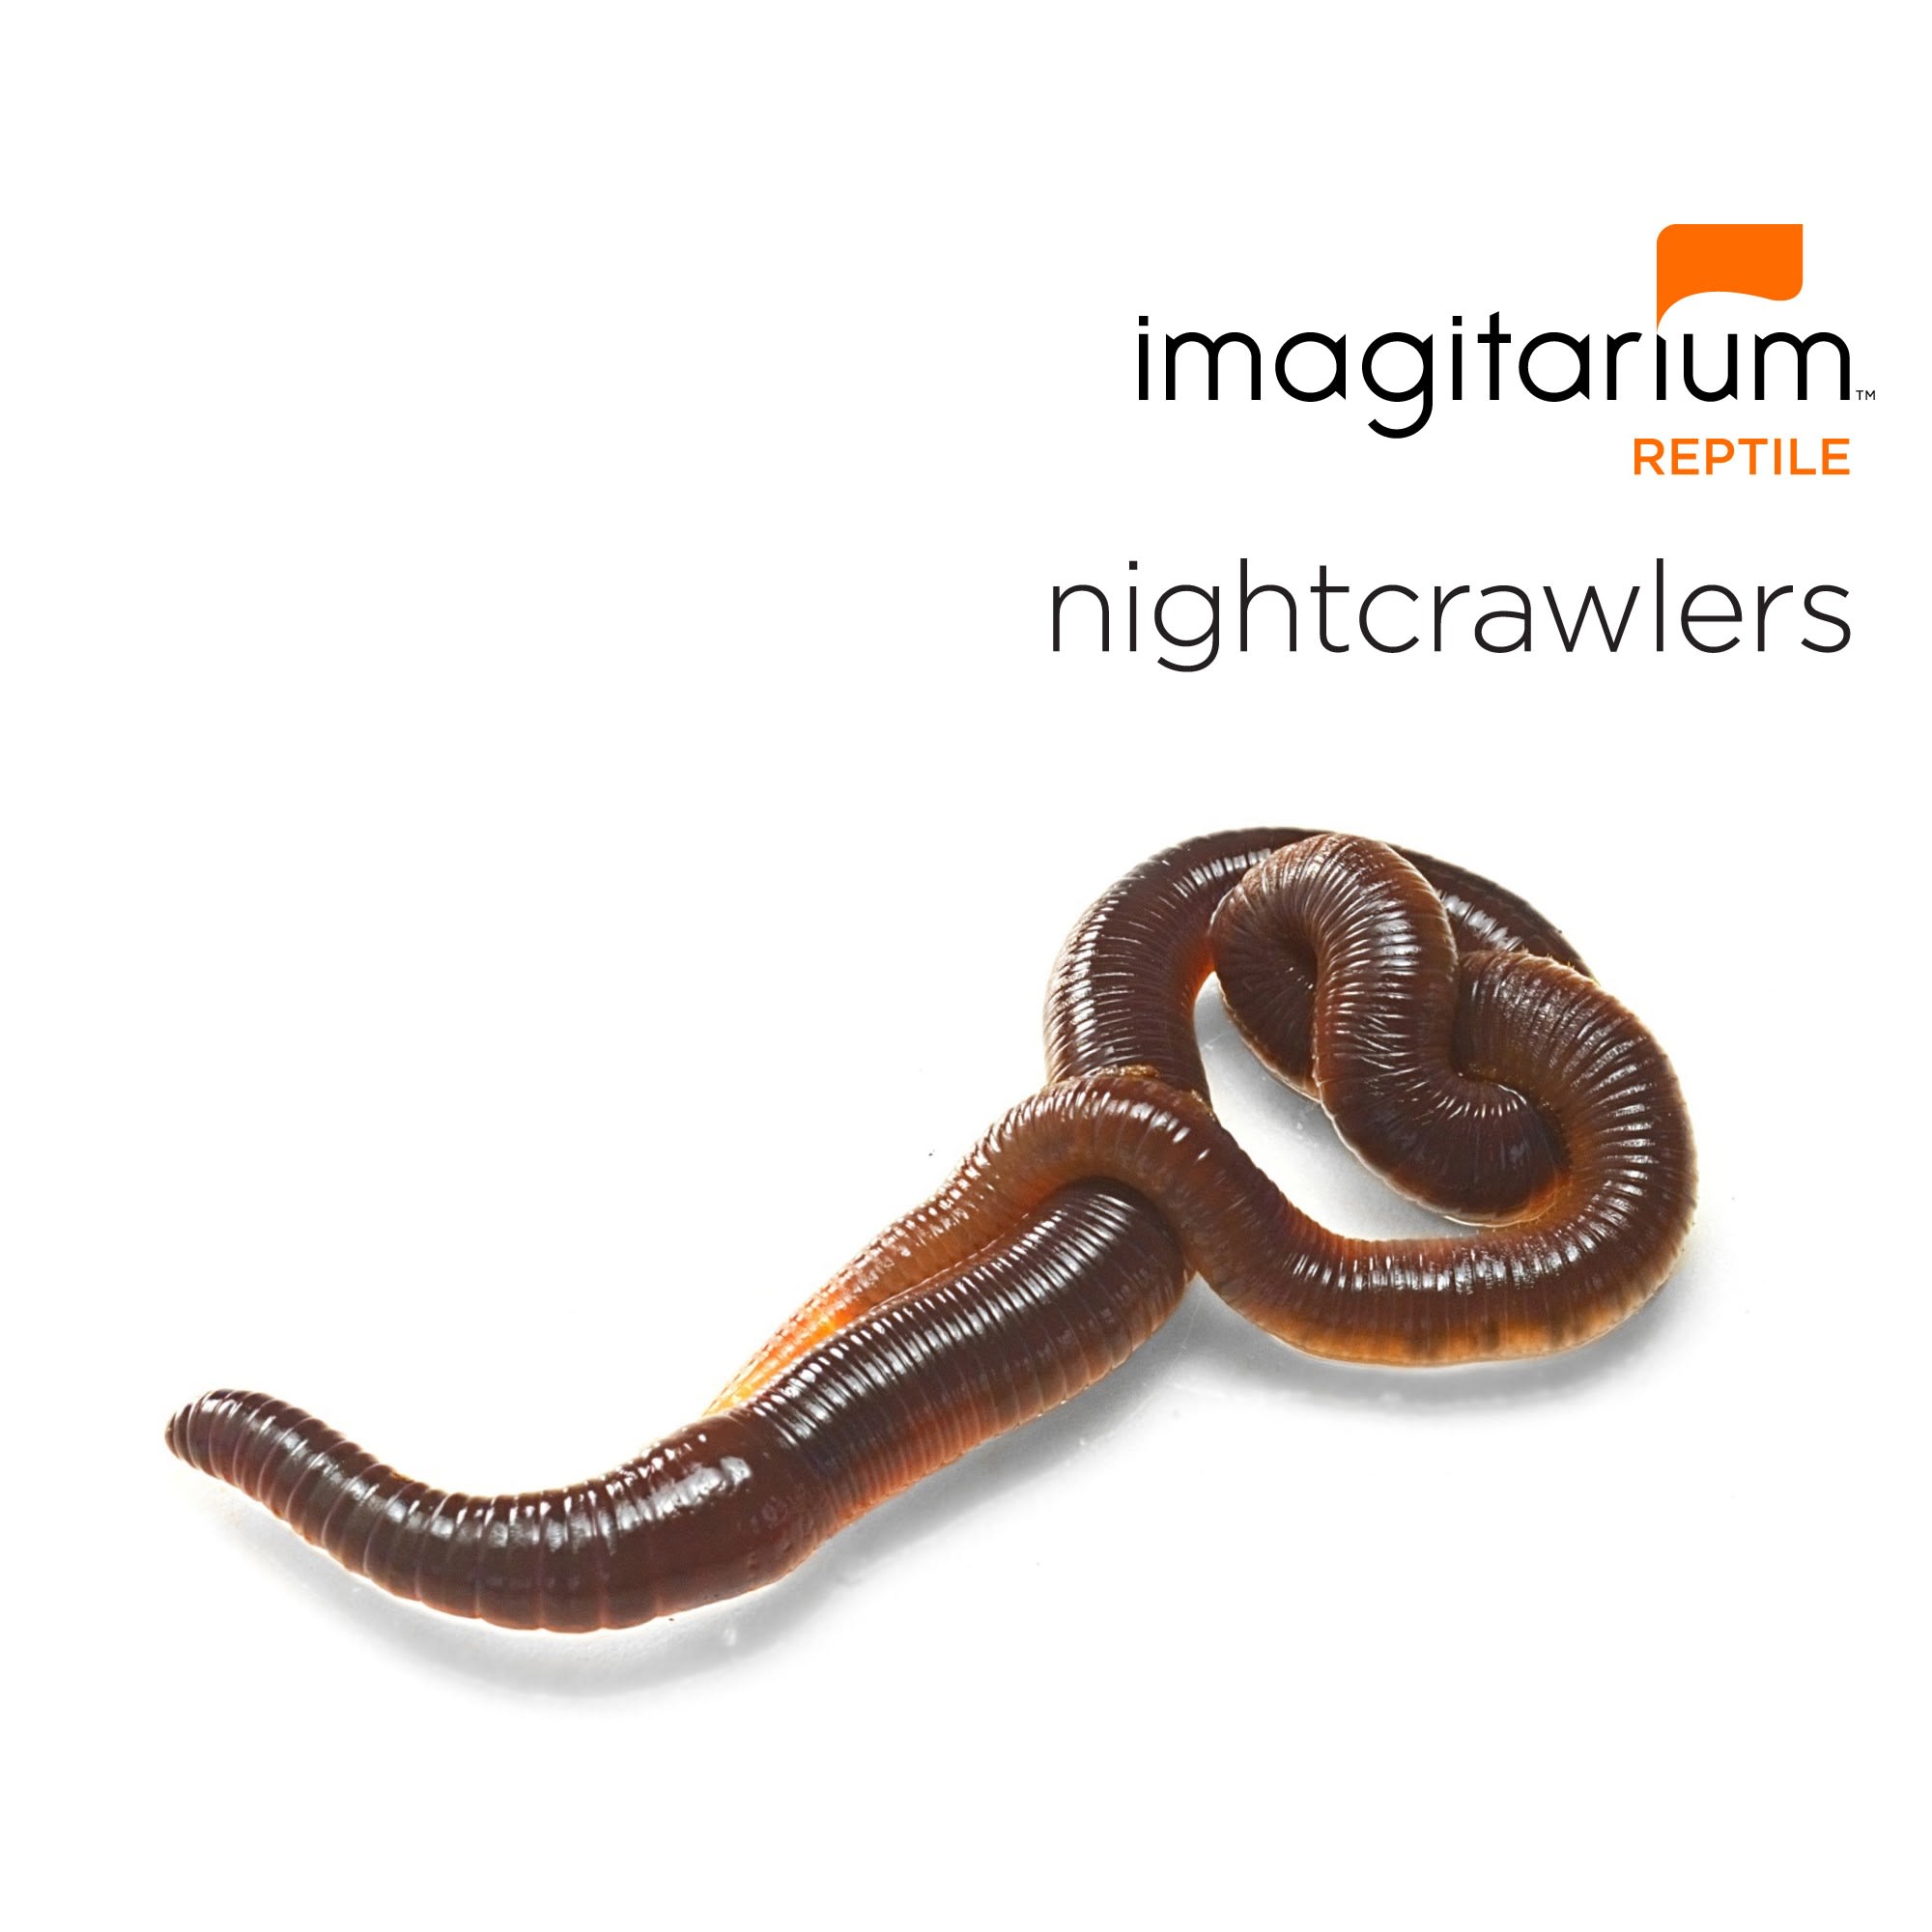 Live Night Crawlers - 12 Count Cup, reptile Food